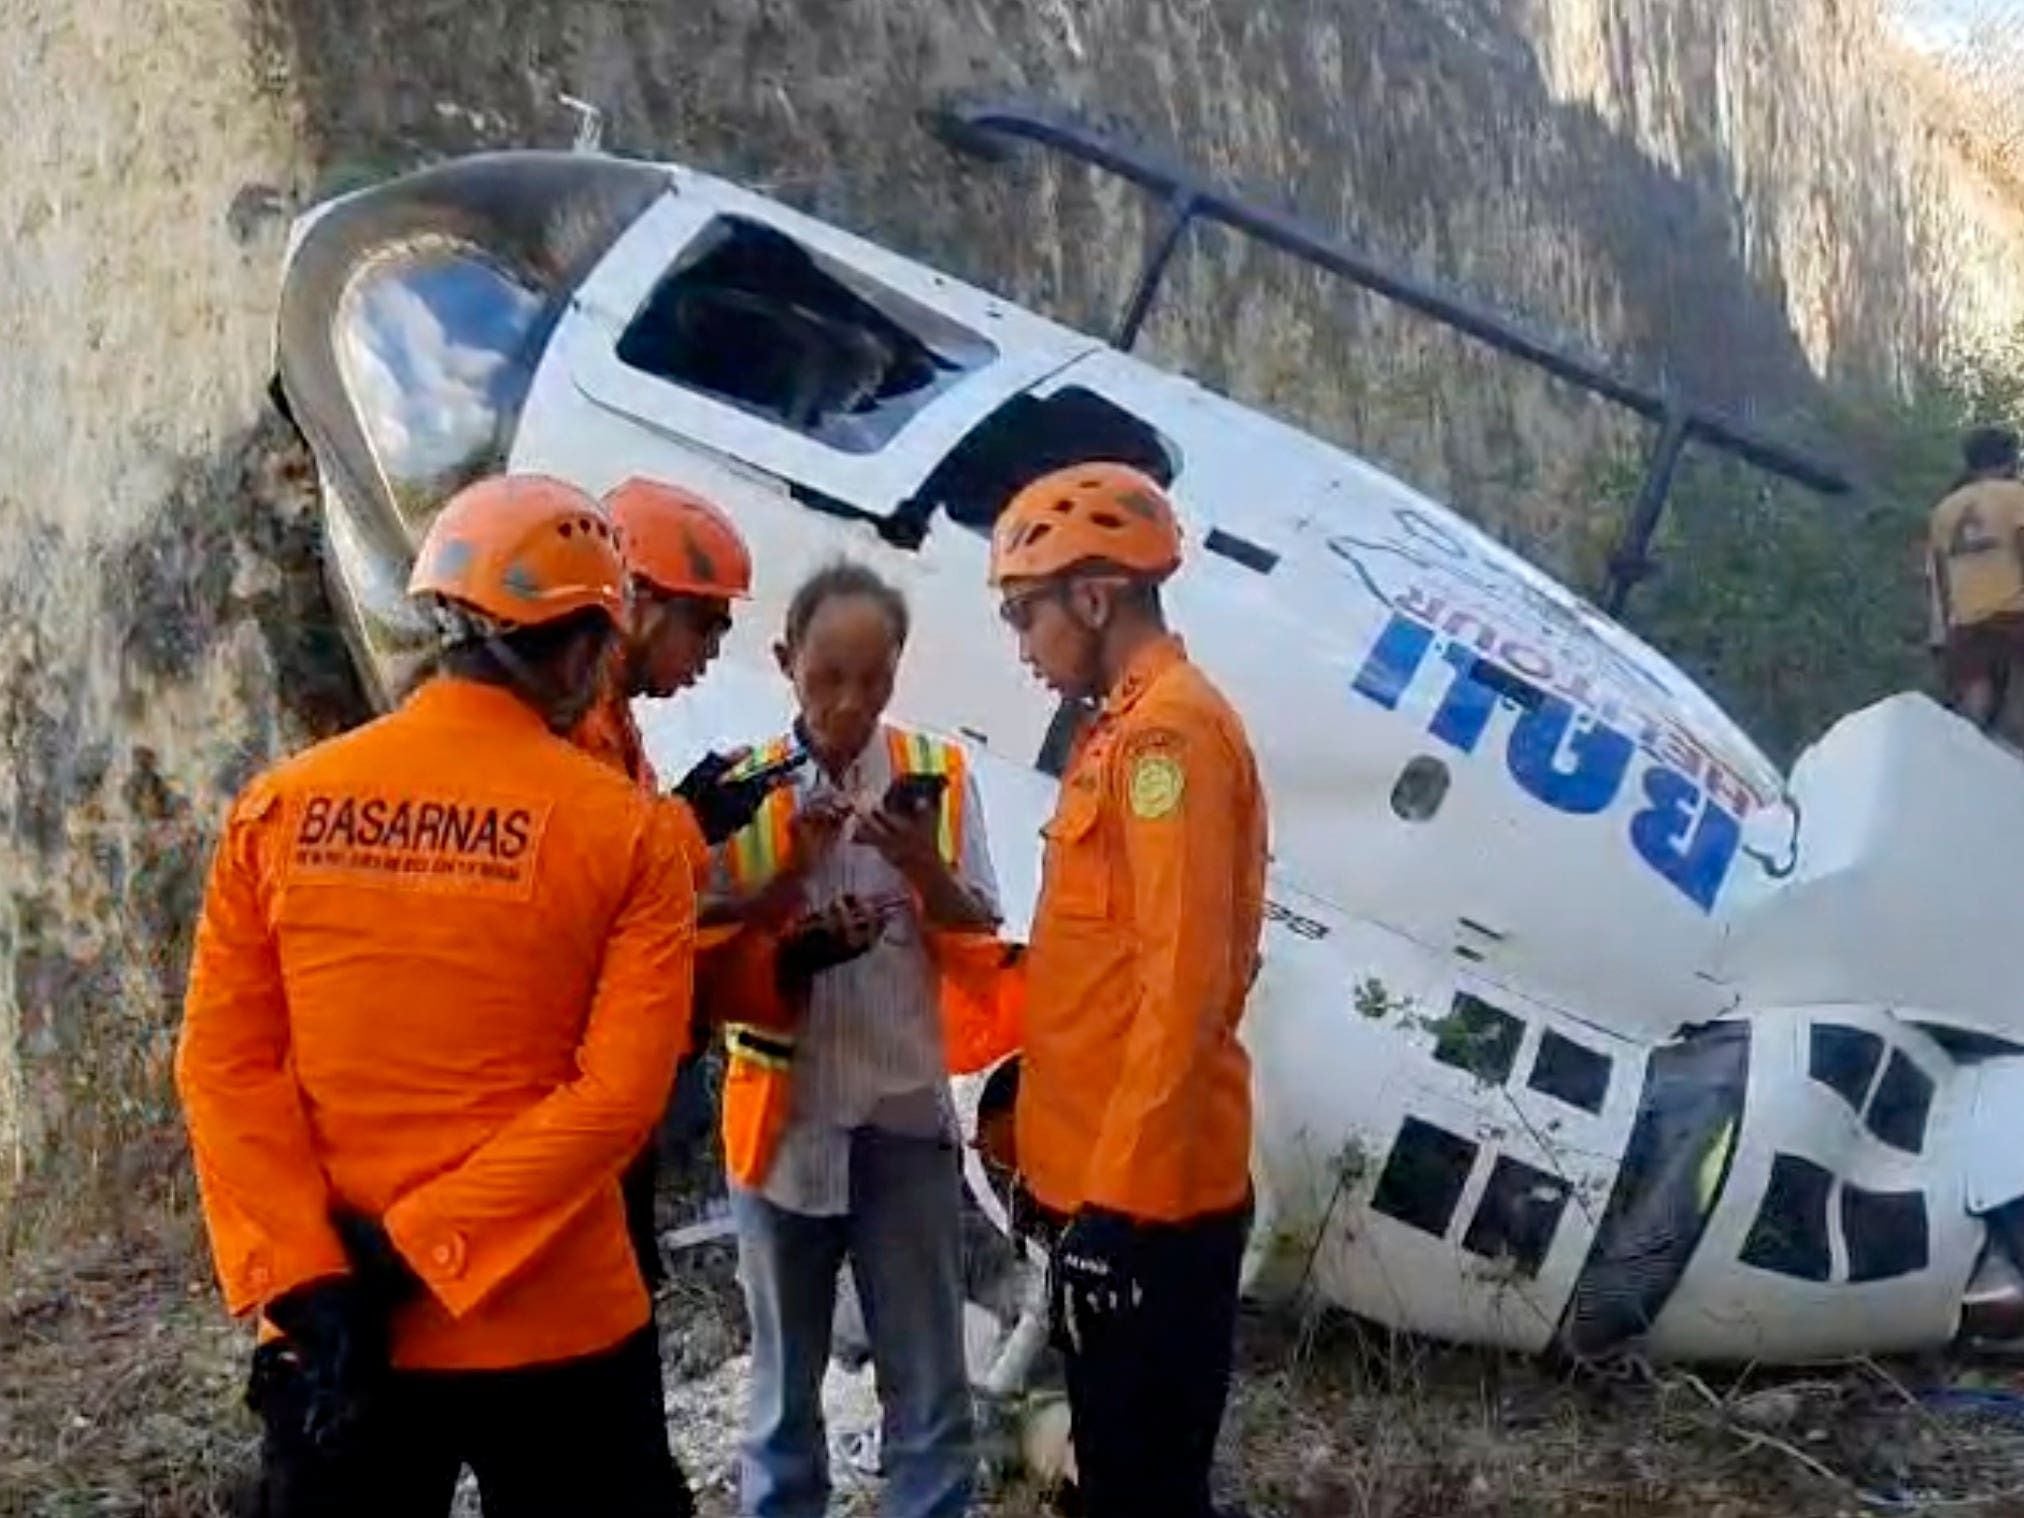 Five people survive tourist helicopter crash in Bali